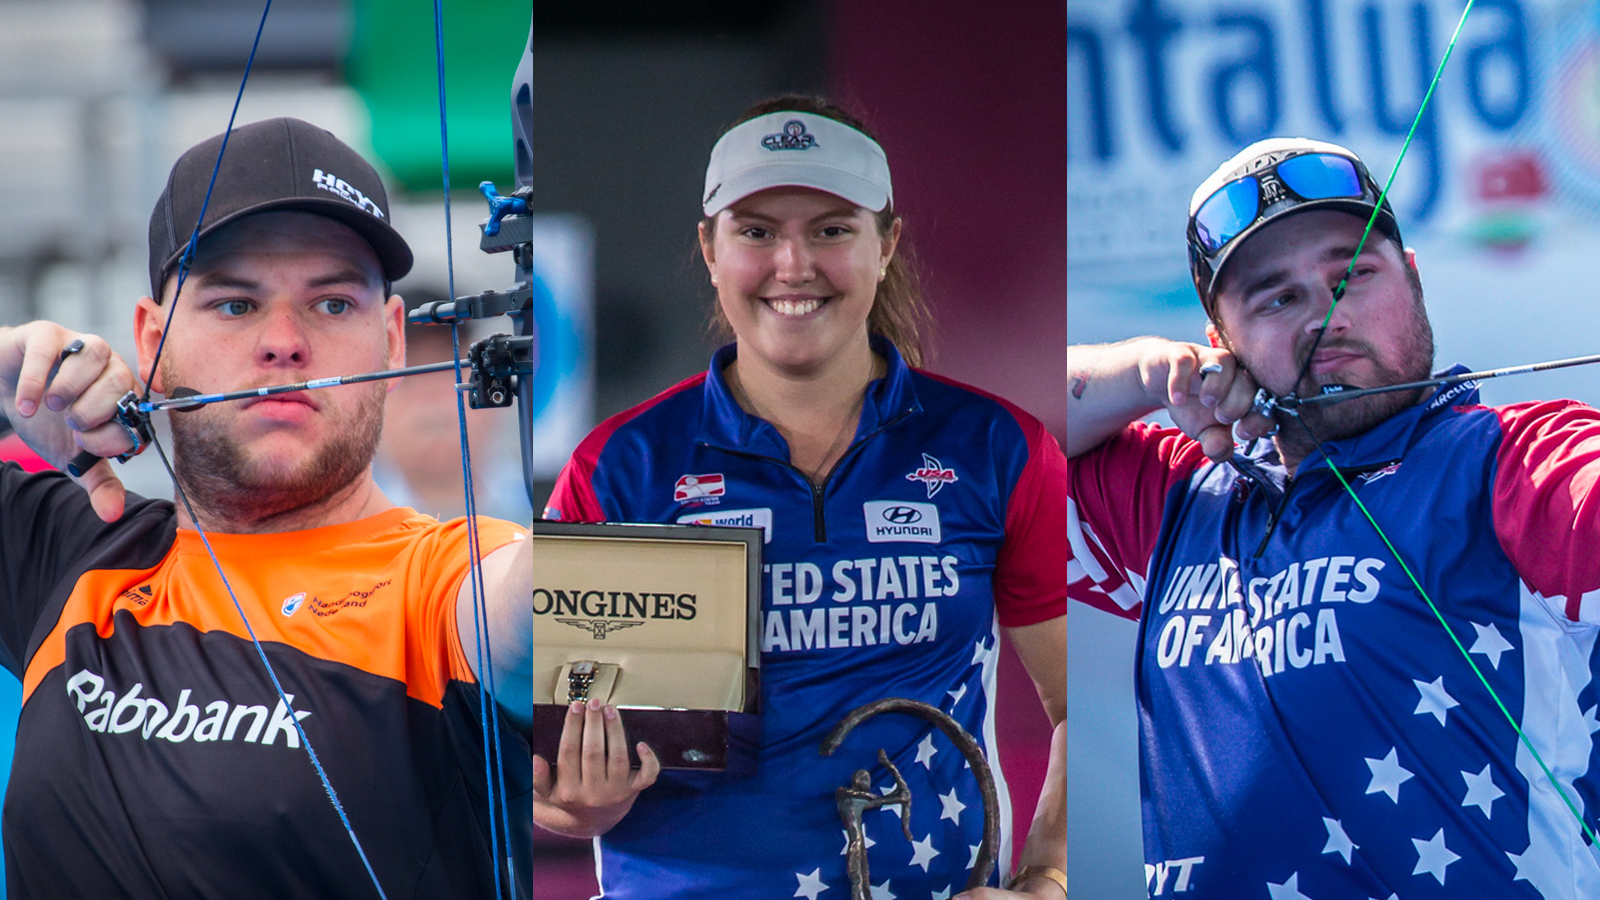 TruBall/Axcel indoor team to feature both reigning circuit champions - World Archery Official Website